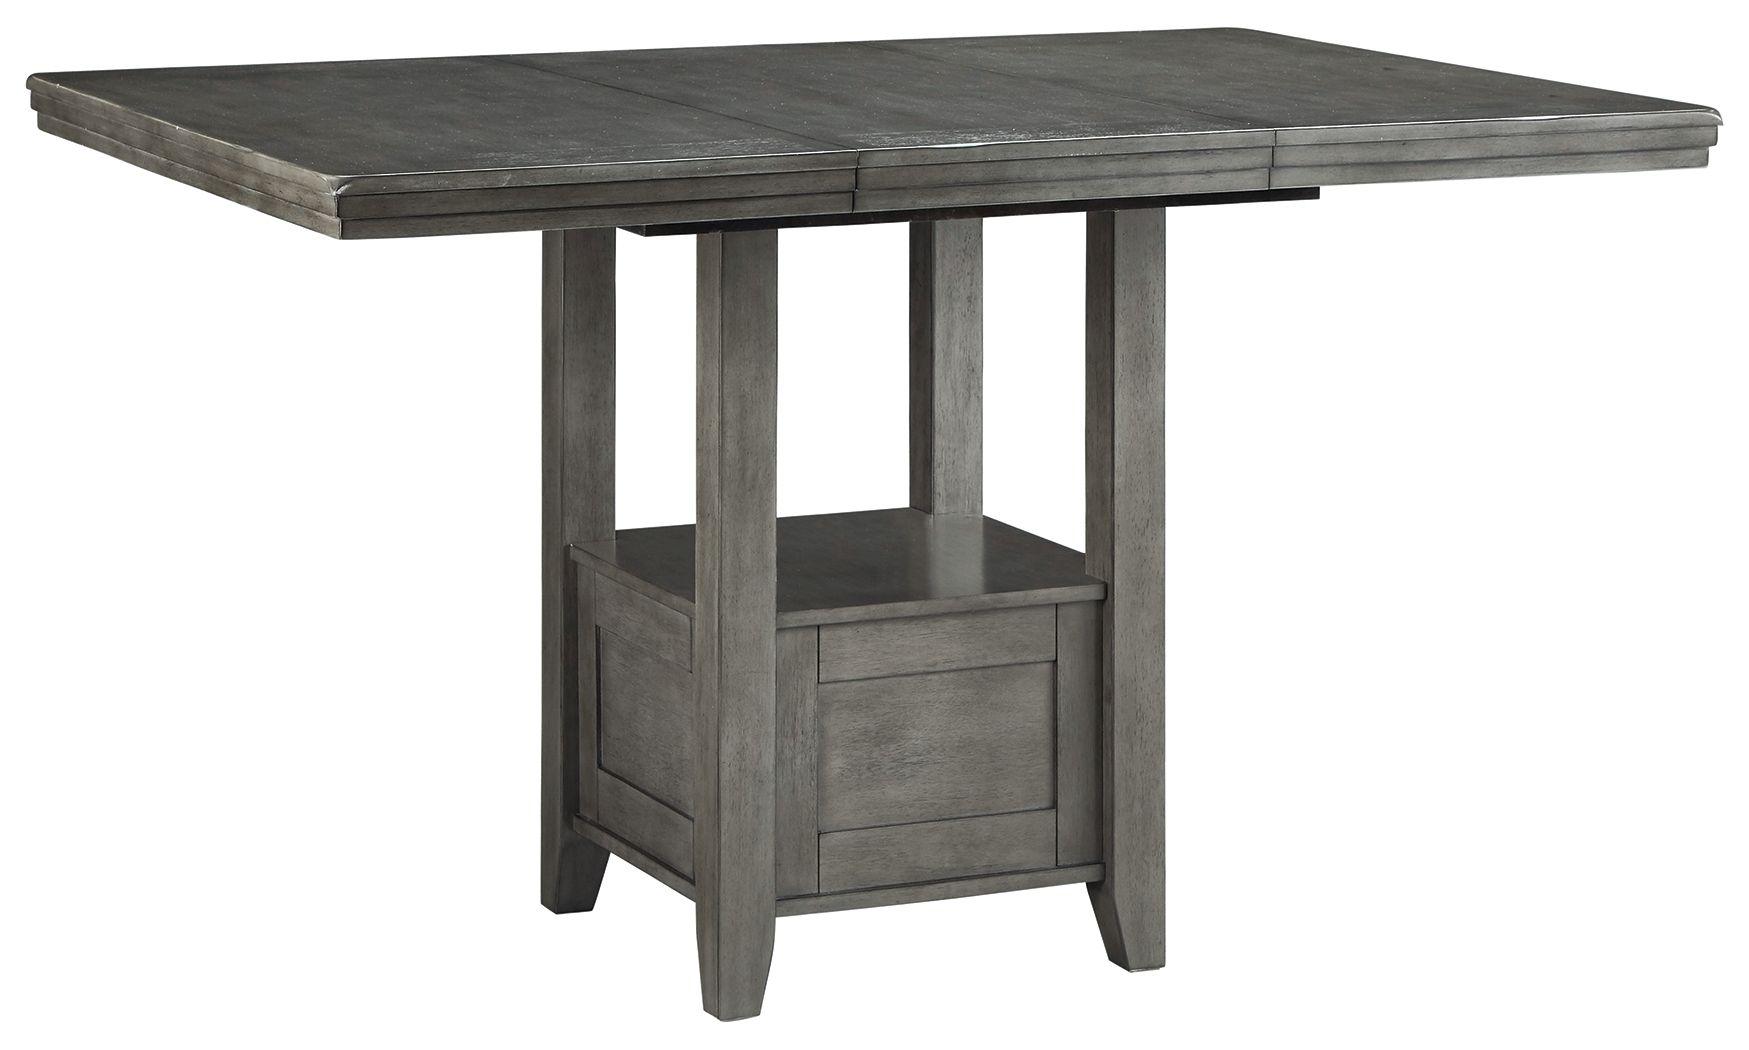 Ashley Furniture - Hallanden - Gray - Rectangular Dining Room Counter Extension Table - 5th Avenue Furniture